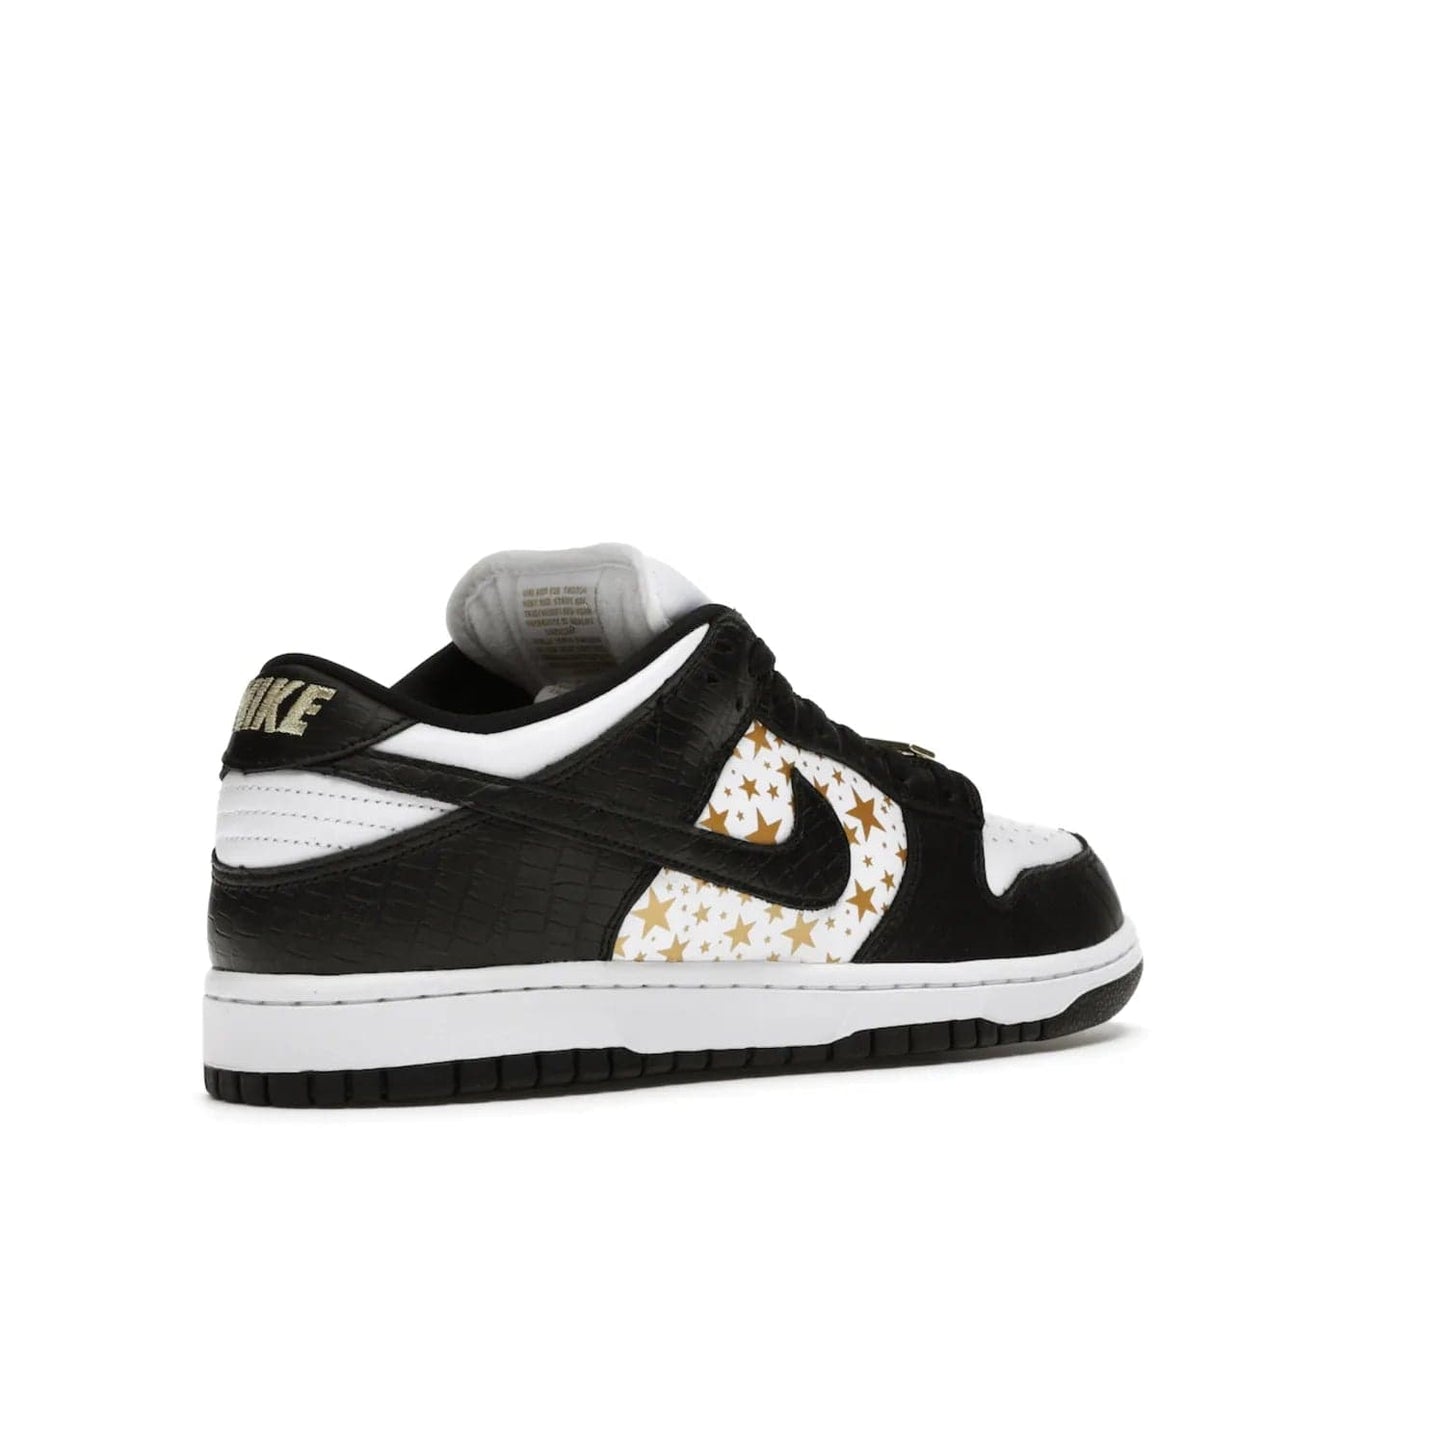 Nike SB Dunk Low Supreme Stars Black (2021) - Image 33 - Only at www.BallersClubKickz.com - Retro style and signature details make the Nike SB Dunk Low Supreme Black a must-have. This special edition shoe features a white leather upper and black croc skin overlays complemented by gold stars and deubré. Enjoy a piece of SB history and grab yours today.